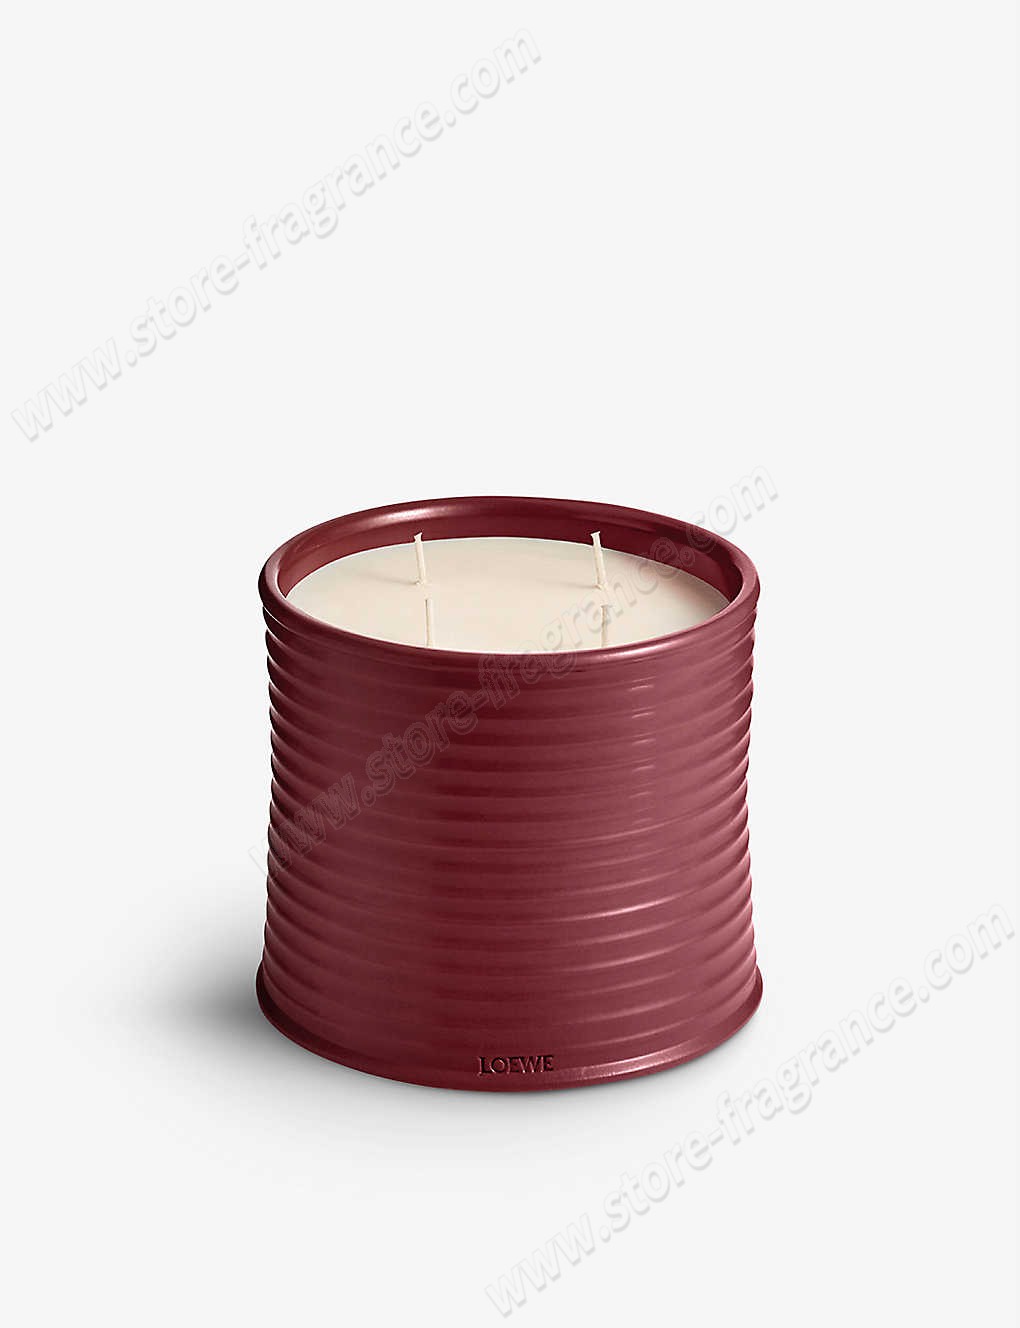 LOEWE/Beetroot large scented candle 2.12kg ✿ Discount Store - LOEWE/Beetroot large scented candle 2.12kg ✿ Discount Store